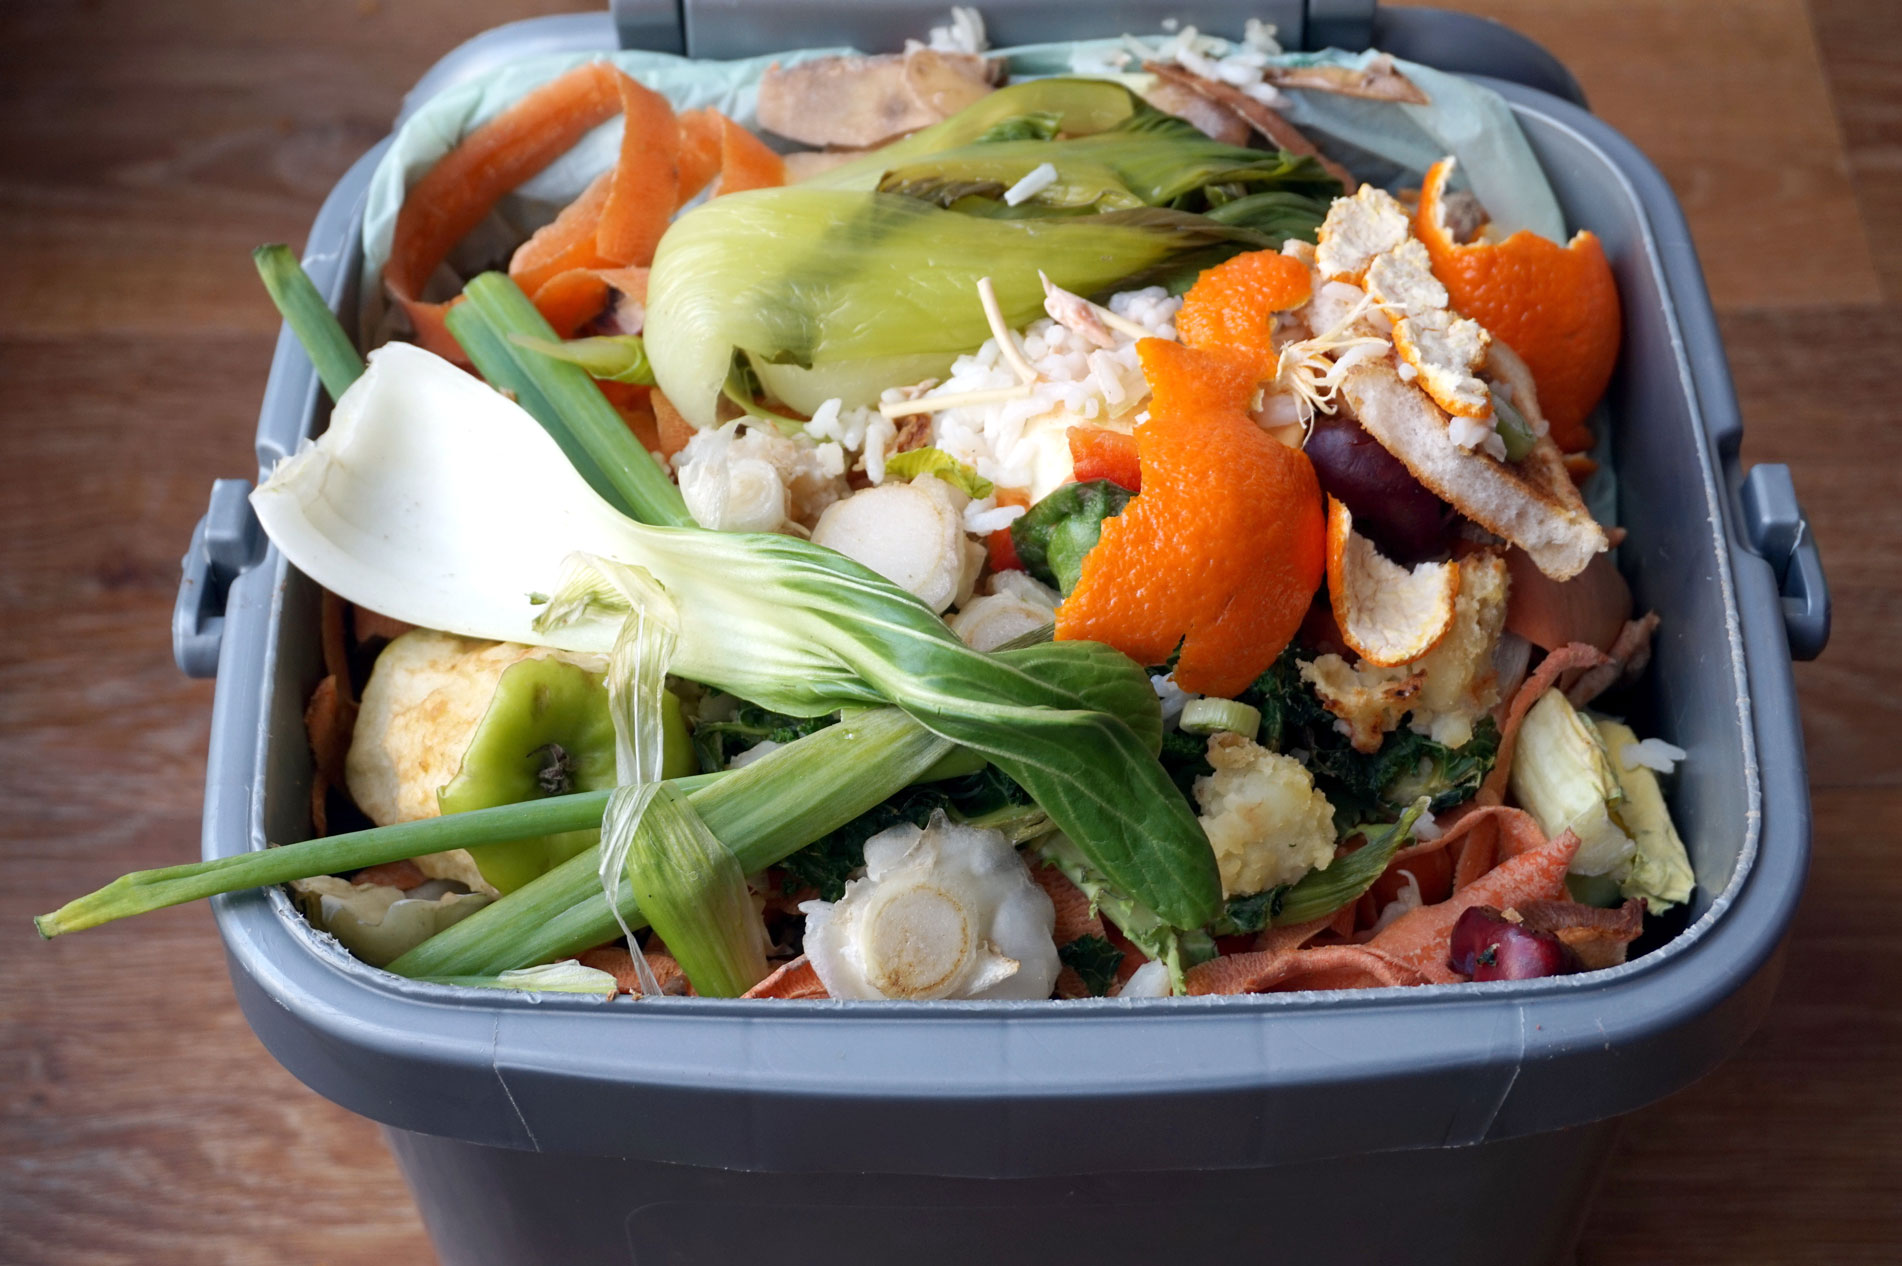 Use compost bins to prevent and reduce food waste